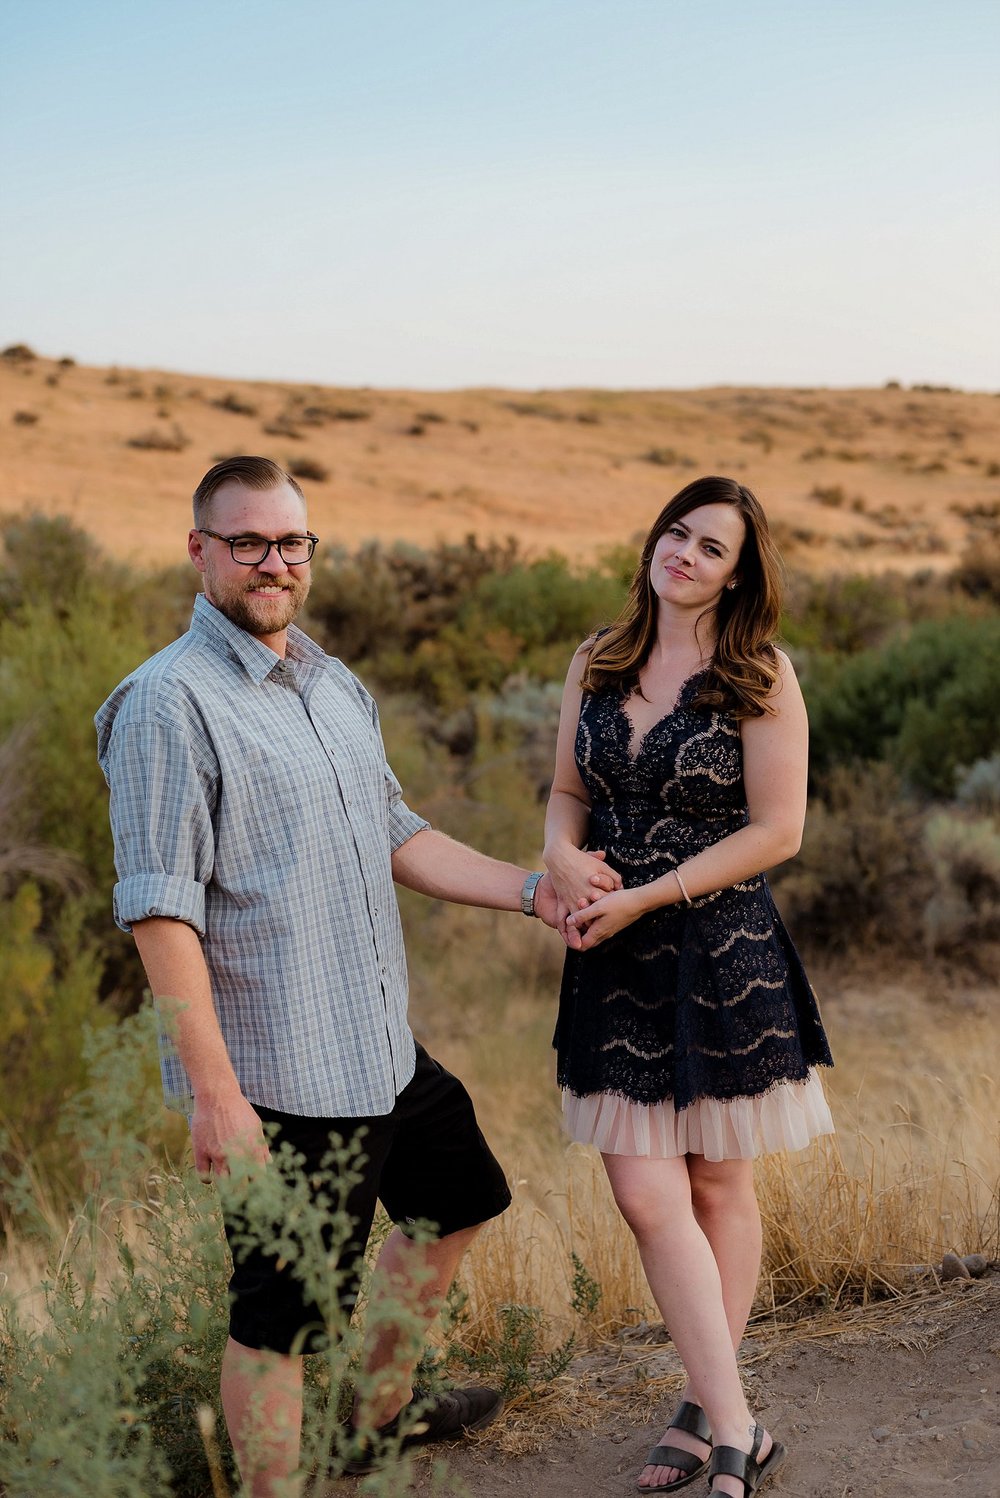 Zilla Photography - Boise Foothills Date Night Couple Session-15_SM.jpg